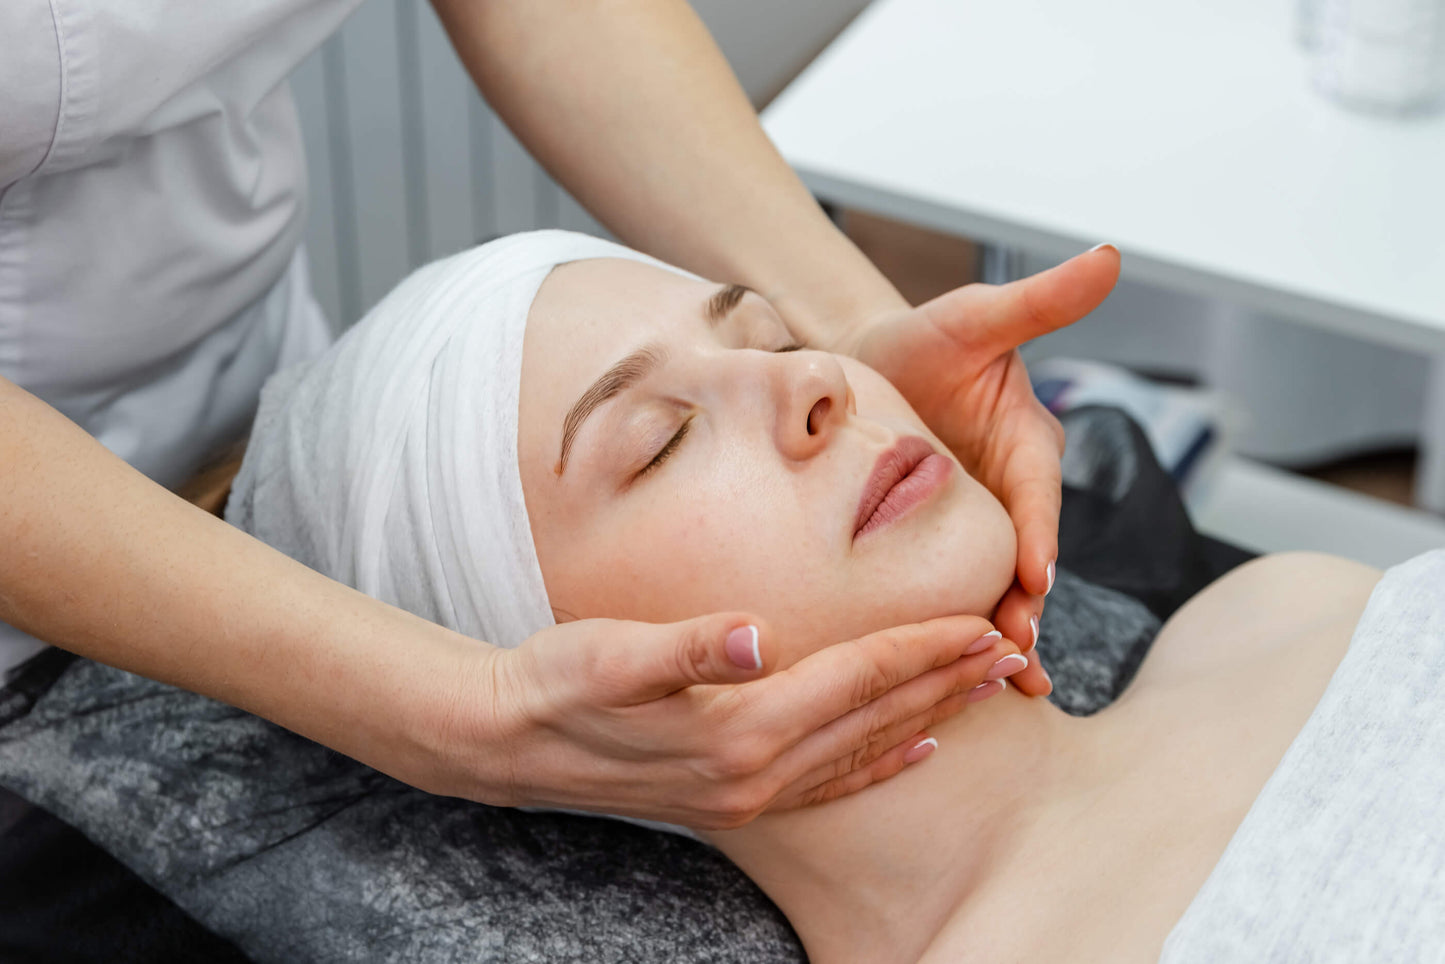 2 Treatments! Get a 50-Minute MASSAGE and 50-Minute FACIAL for Just $99 at J Michelle Med Spa in Thousand Oaks  (Value $298